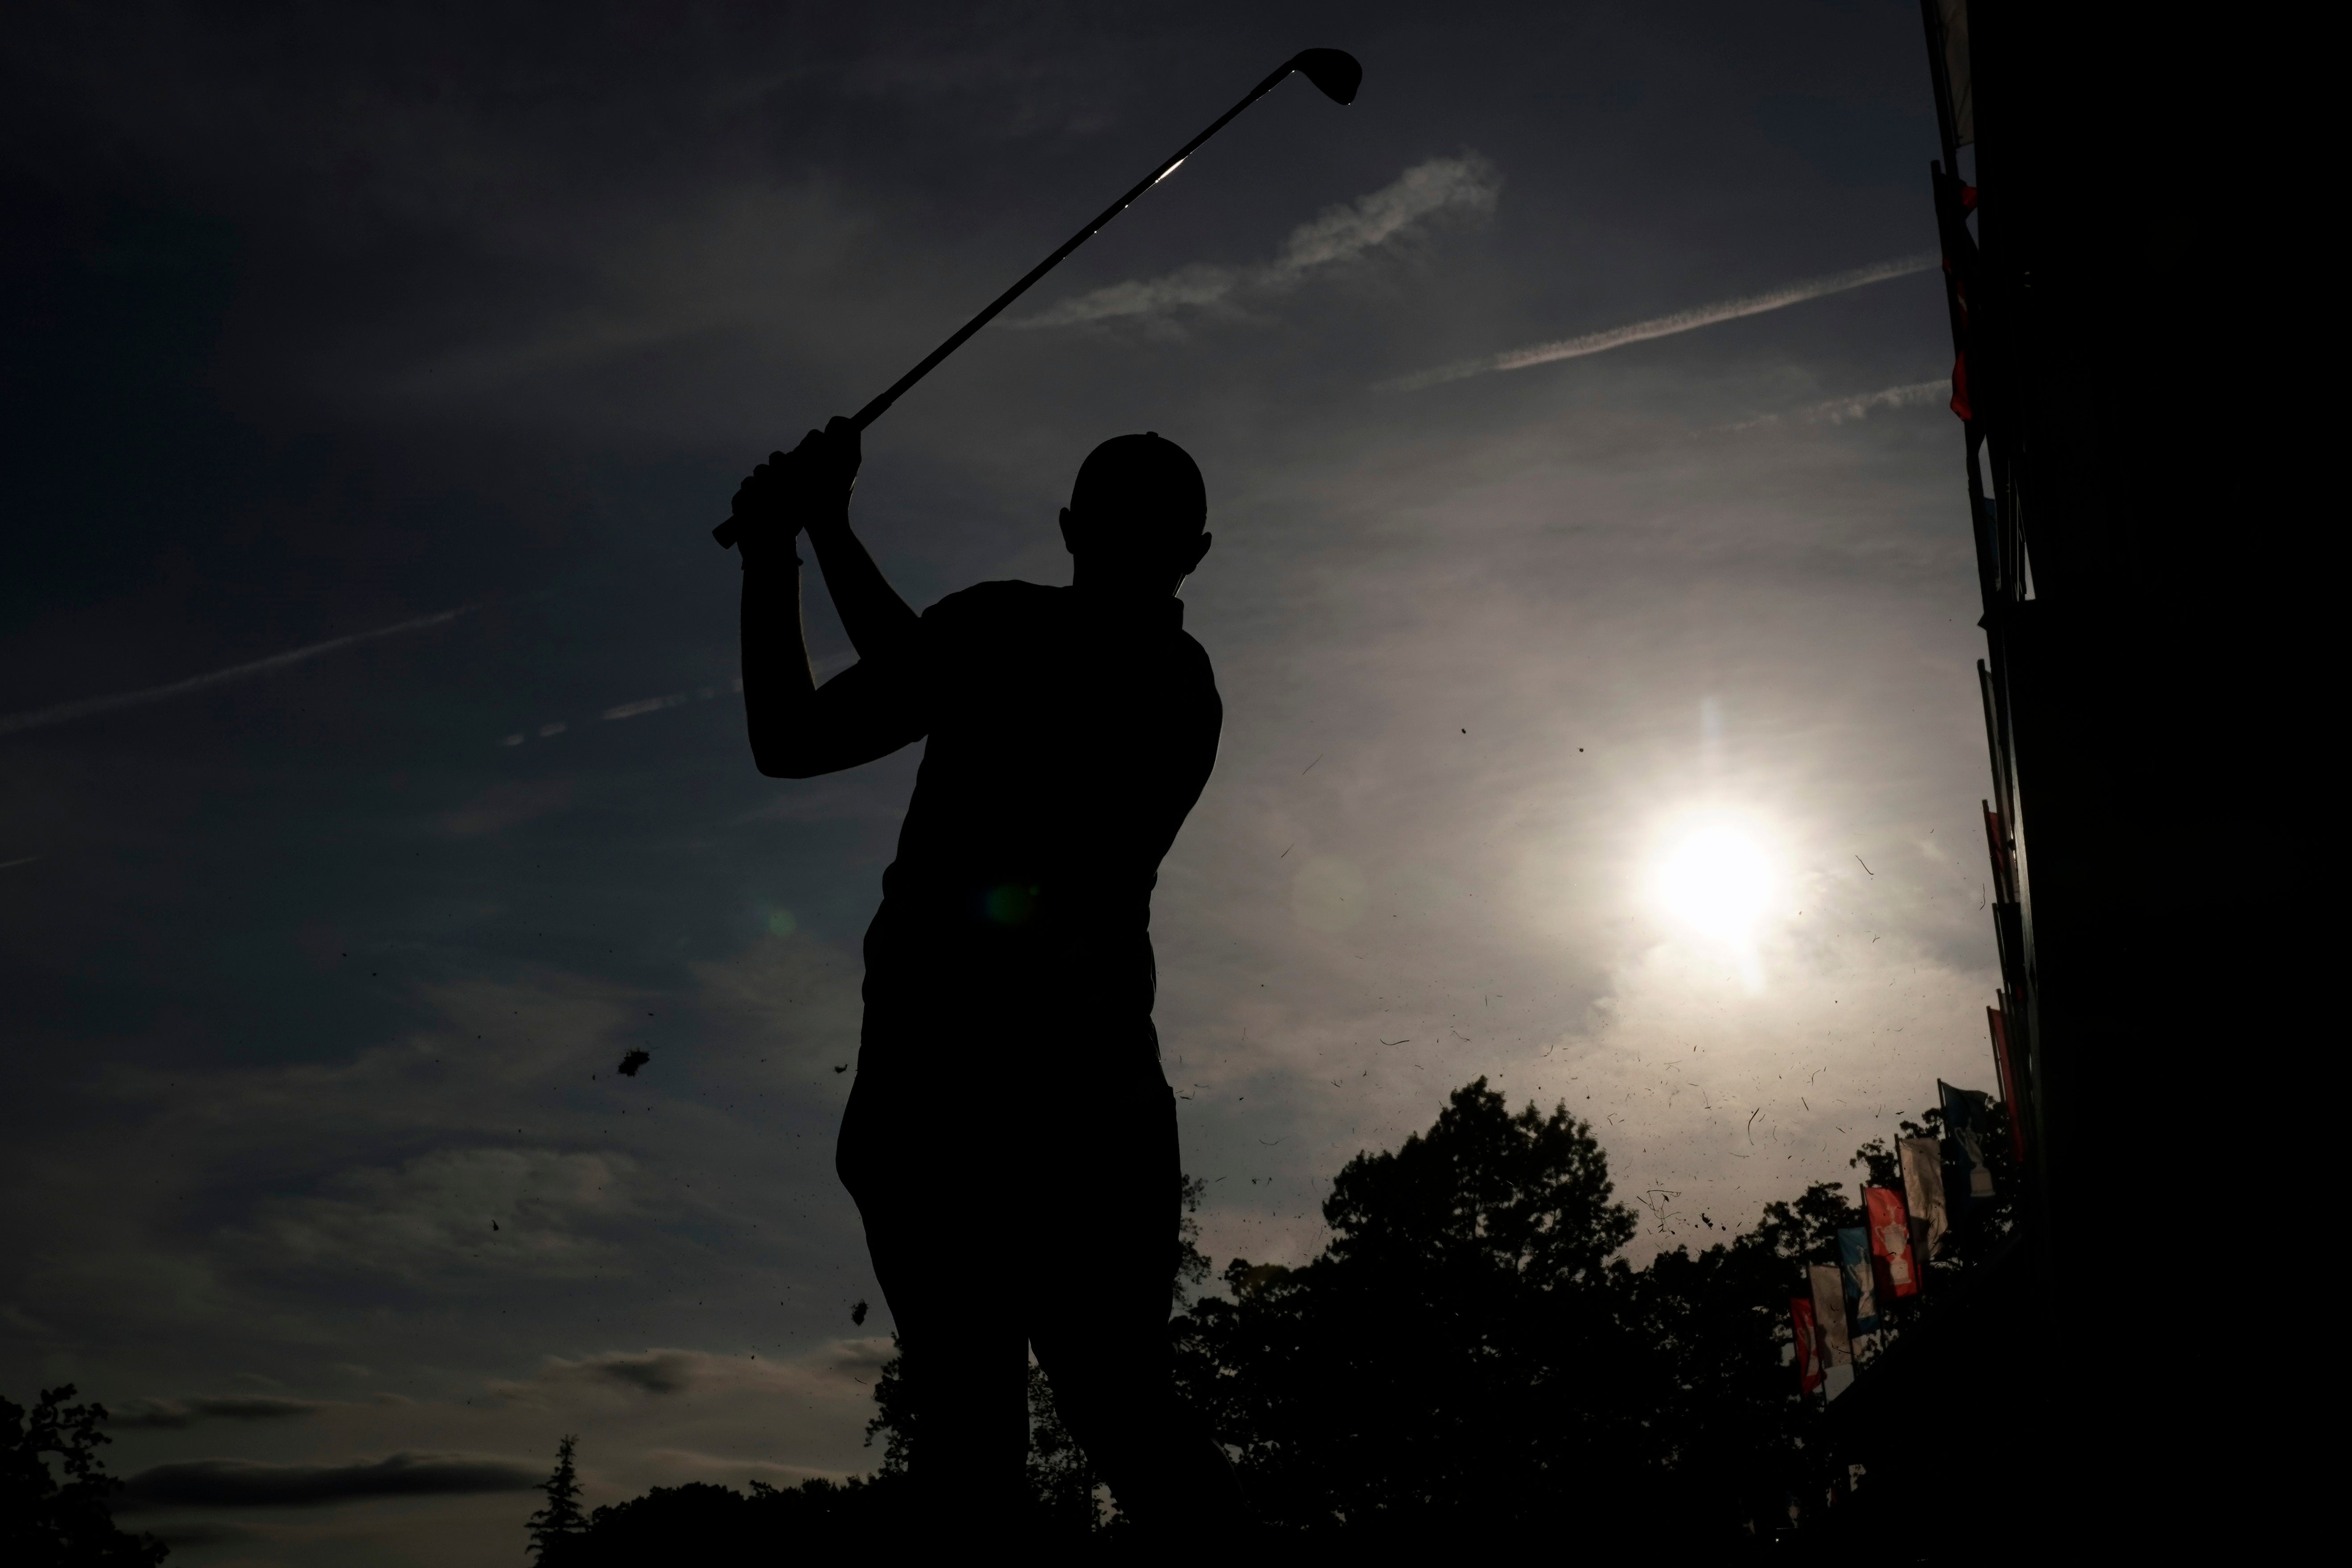 Matt Fitzpatrick watches his shot on the 18th hole during the first round of the US Open (Charlie Riedel/AP)